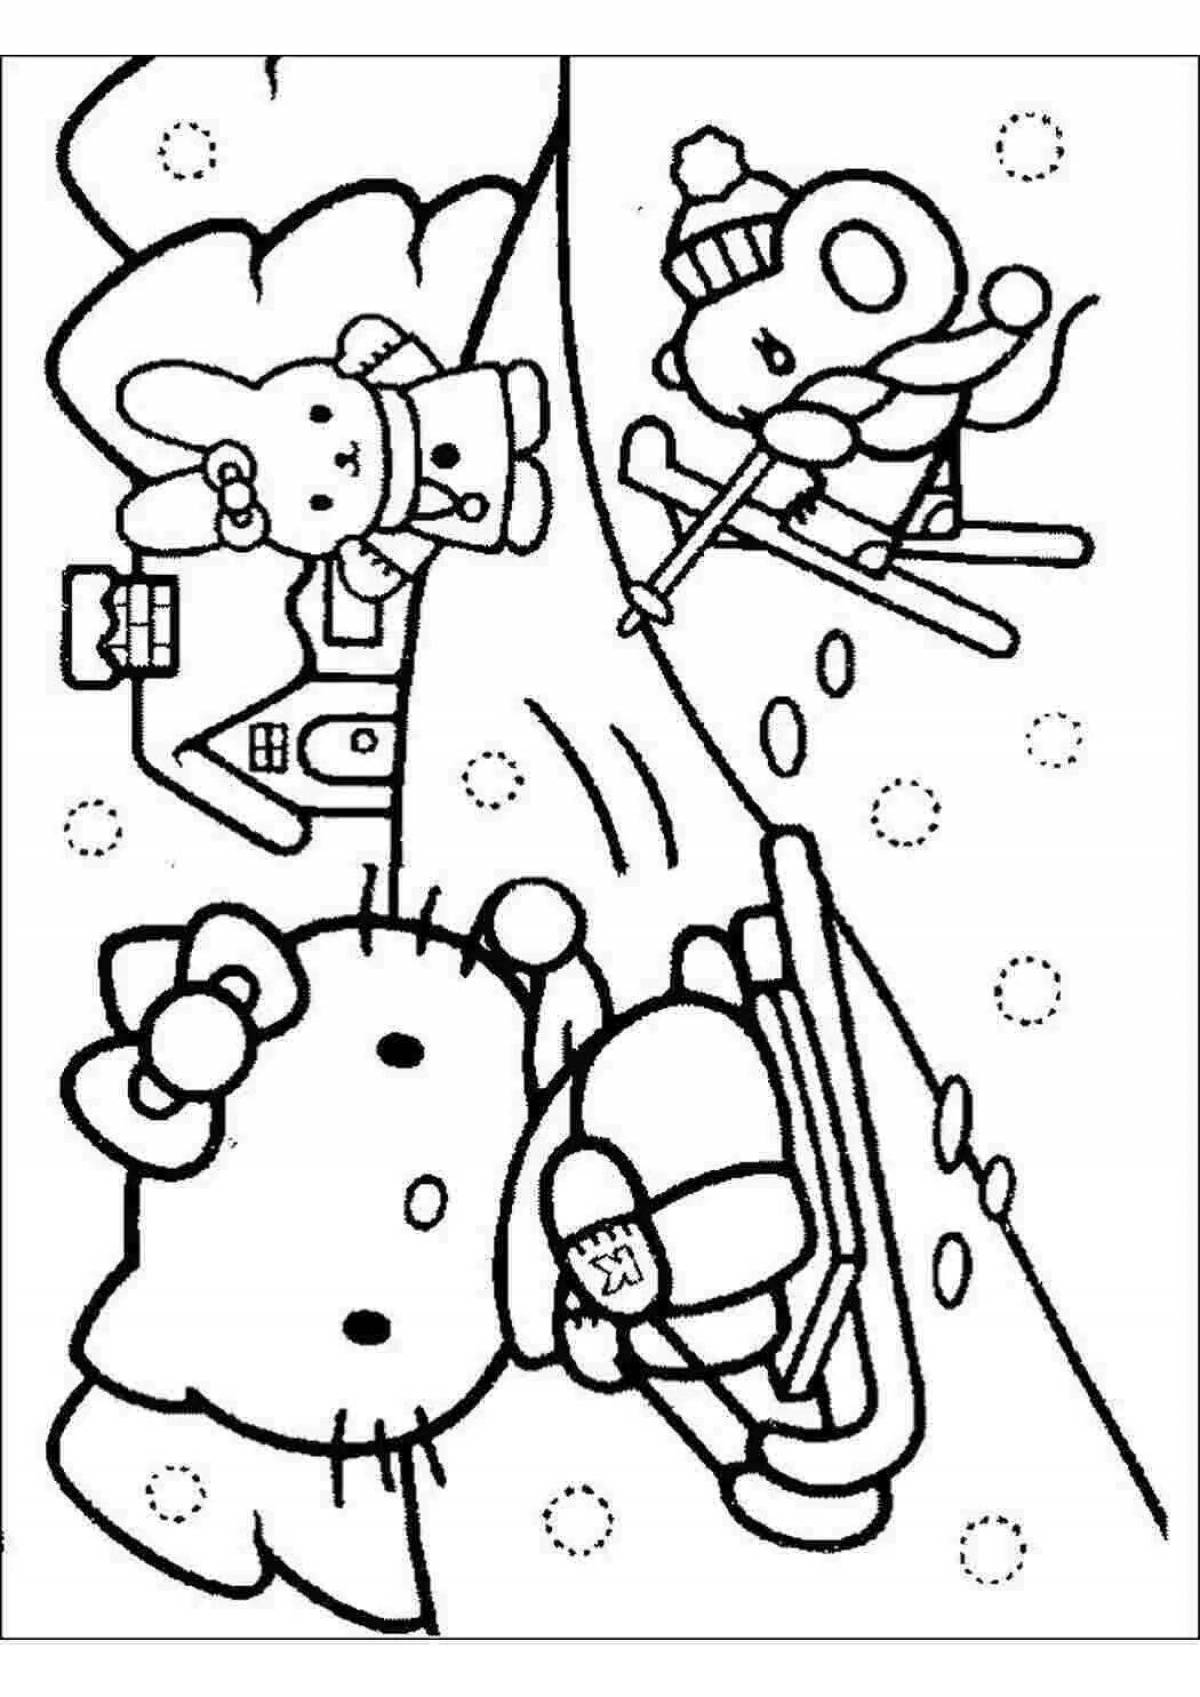 Merry Kitty Christmas coloring book